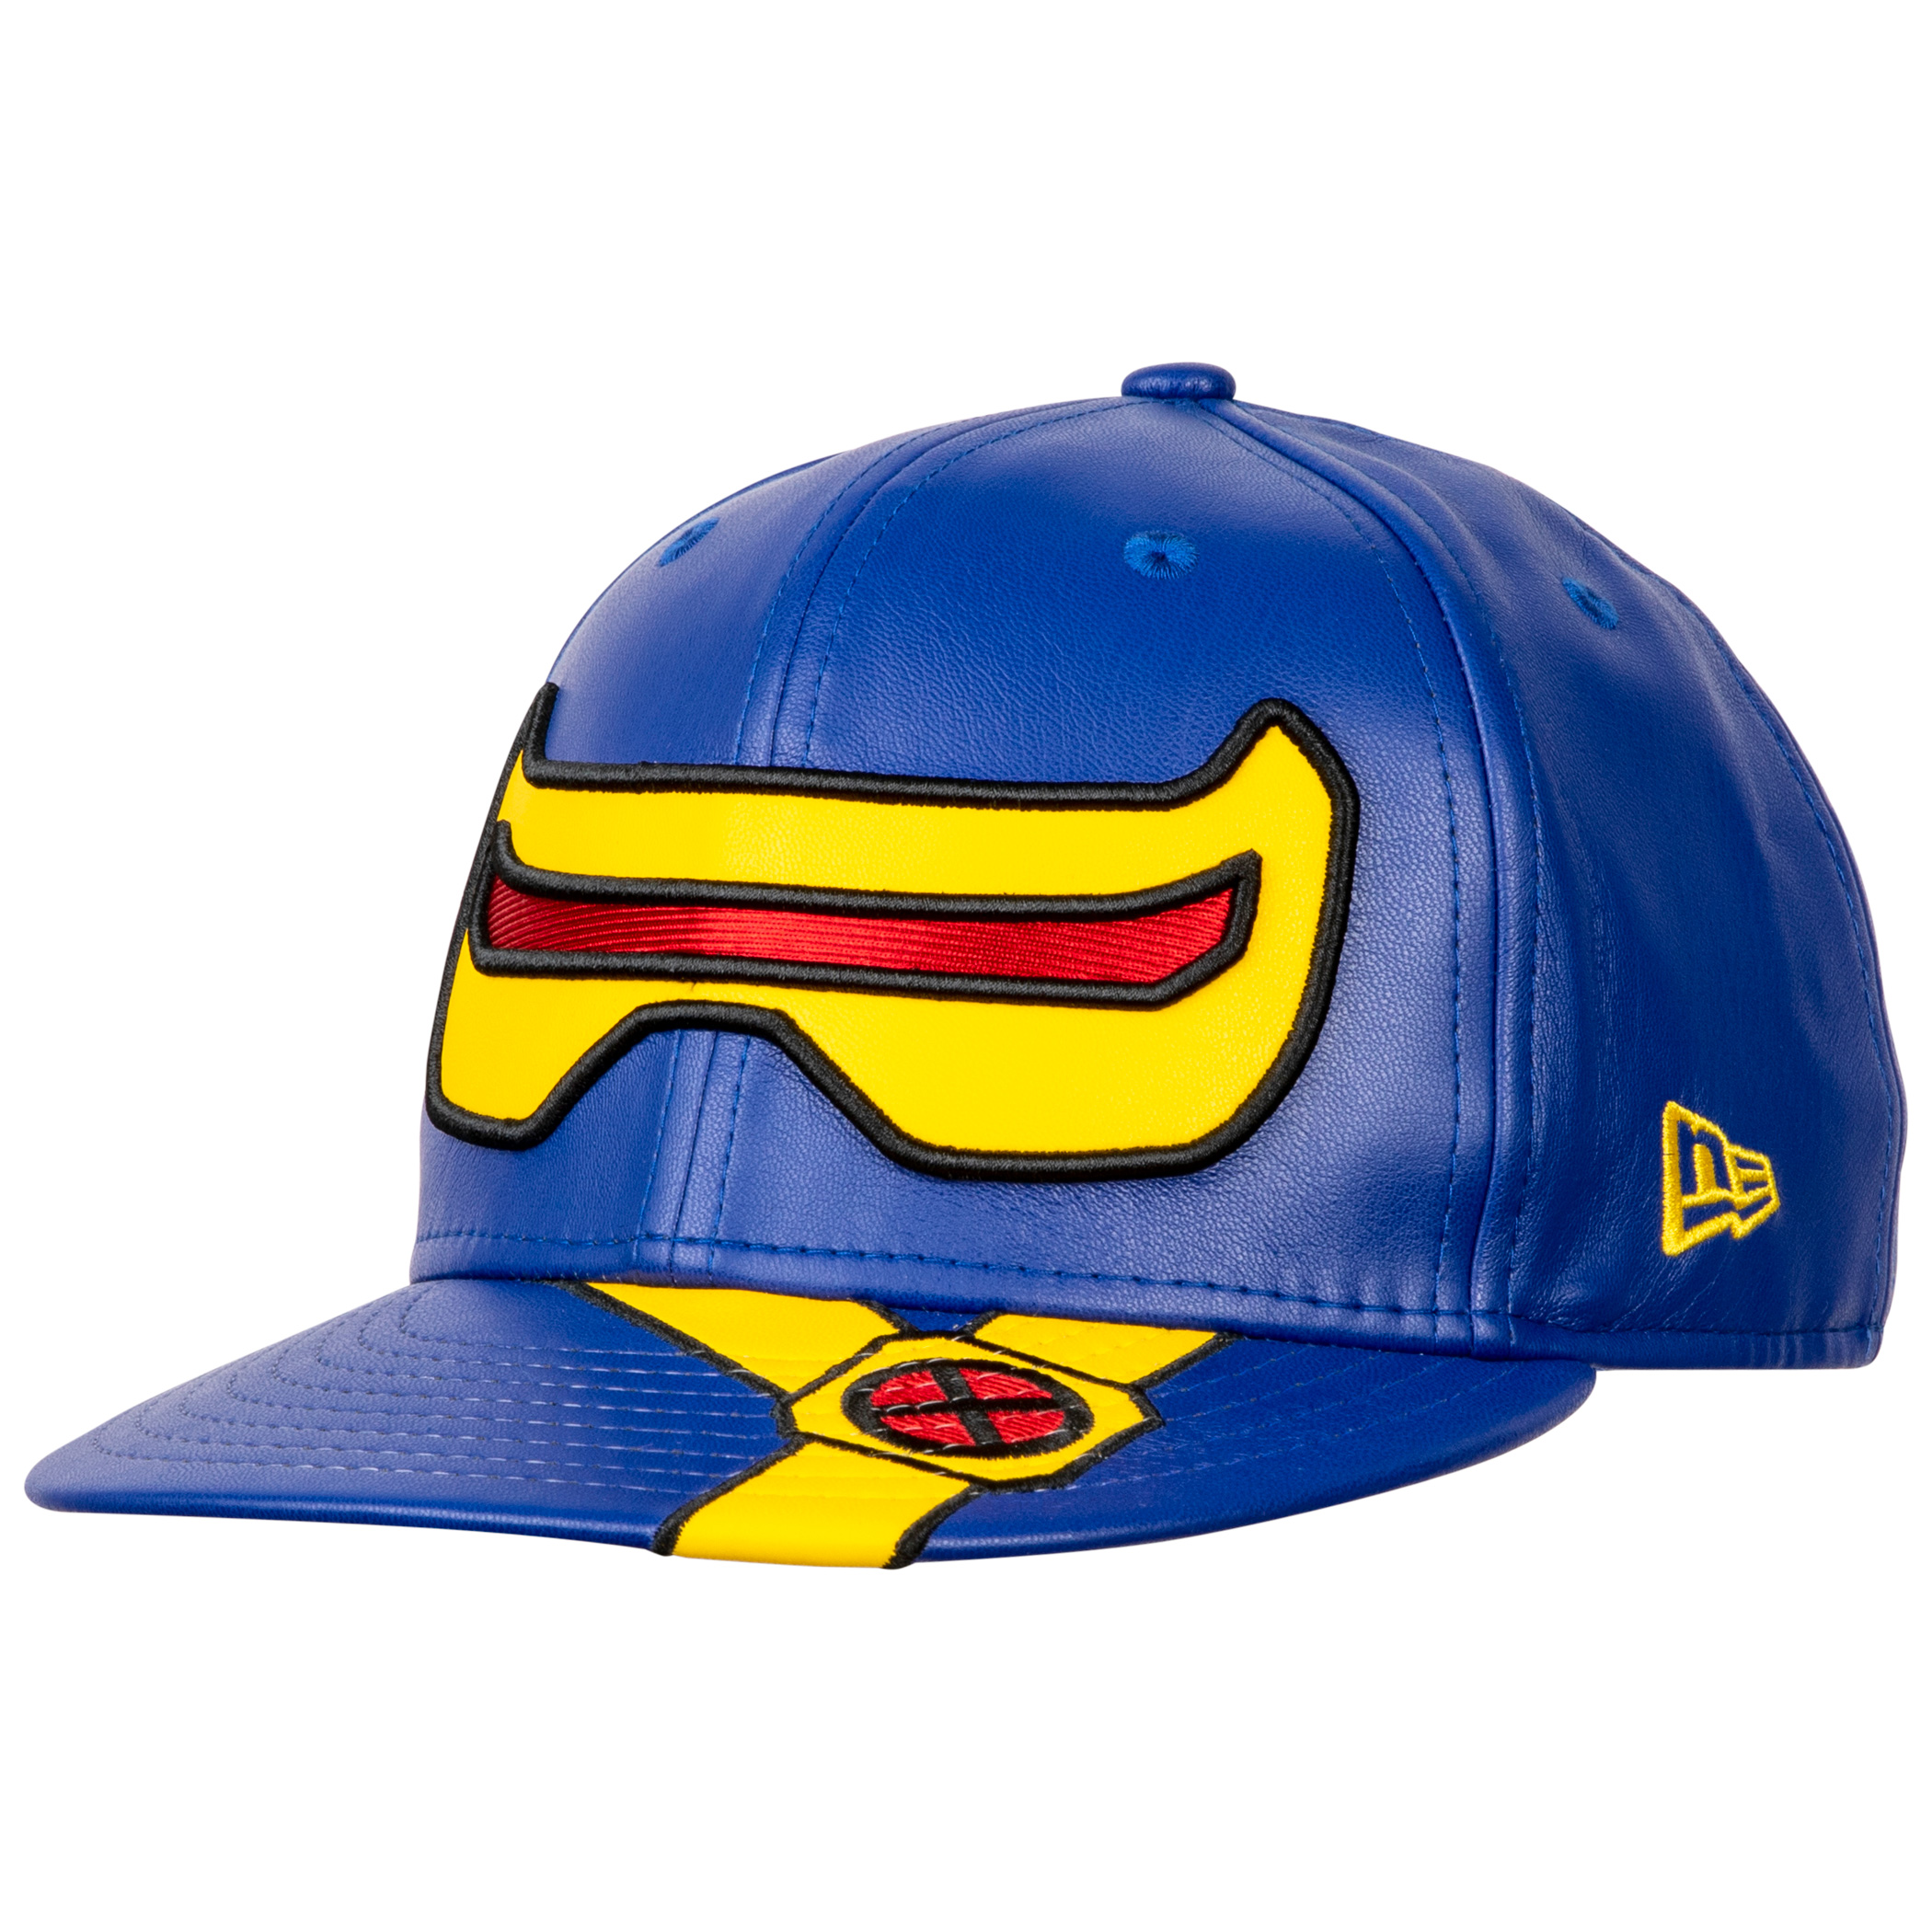 XMen's Cyclops Character Armor 59Fifty Fitted New Era Hat